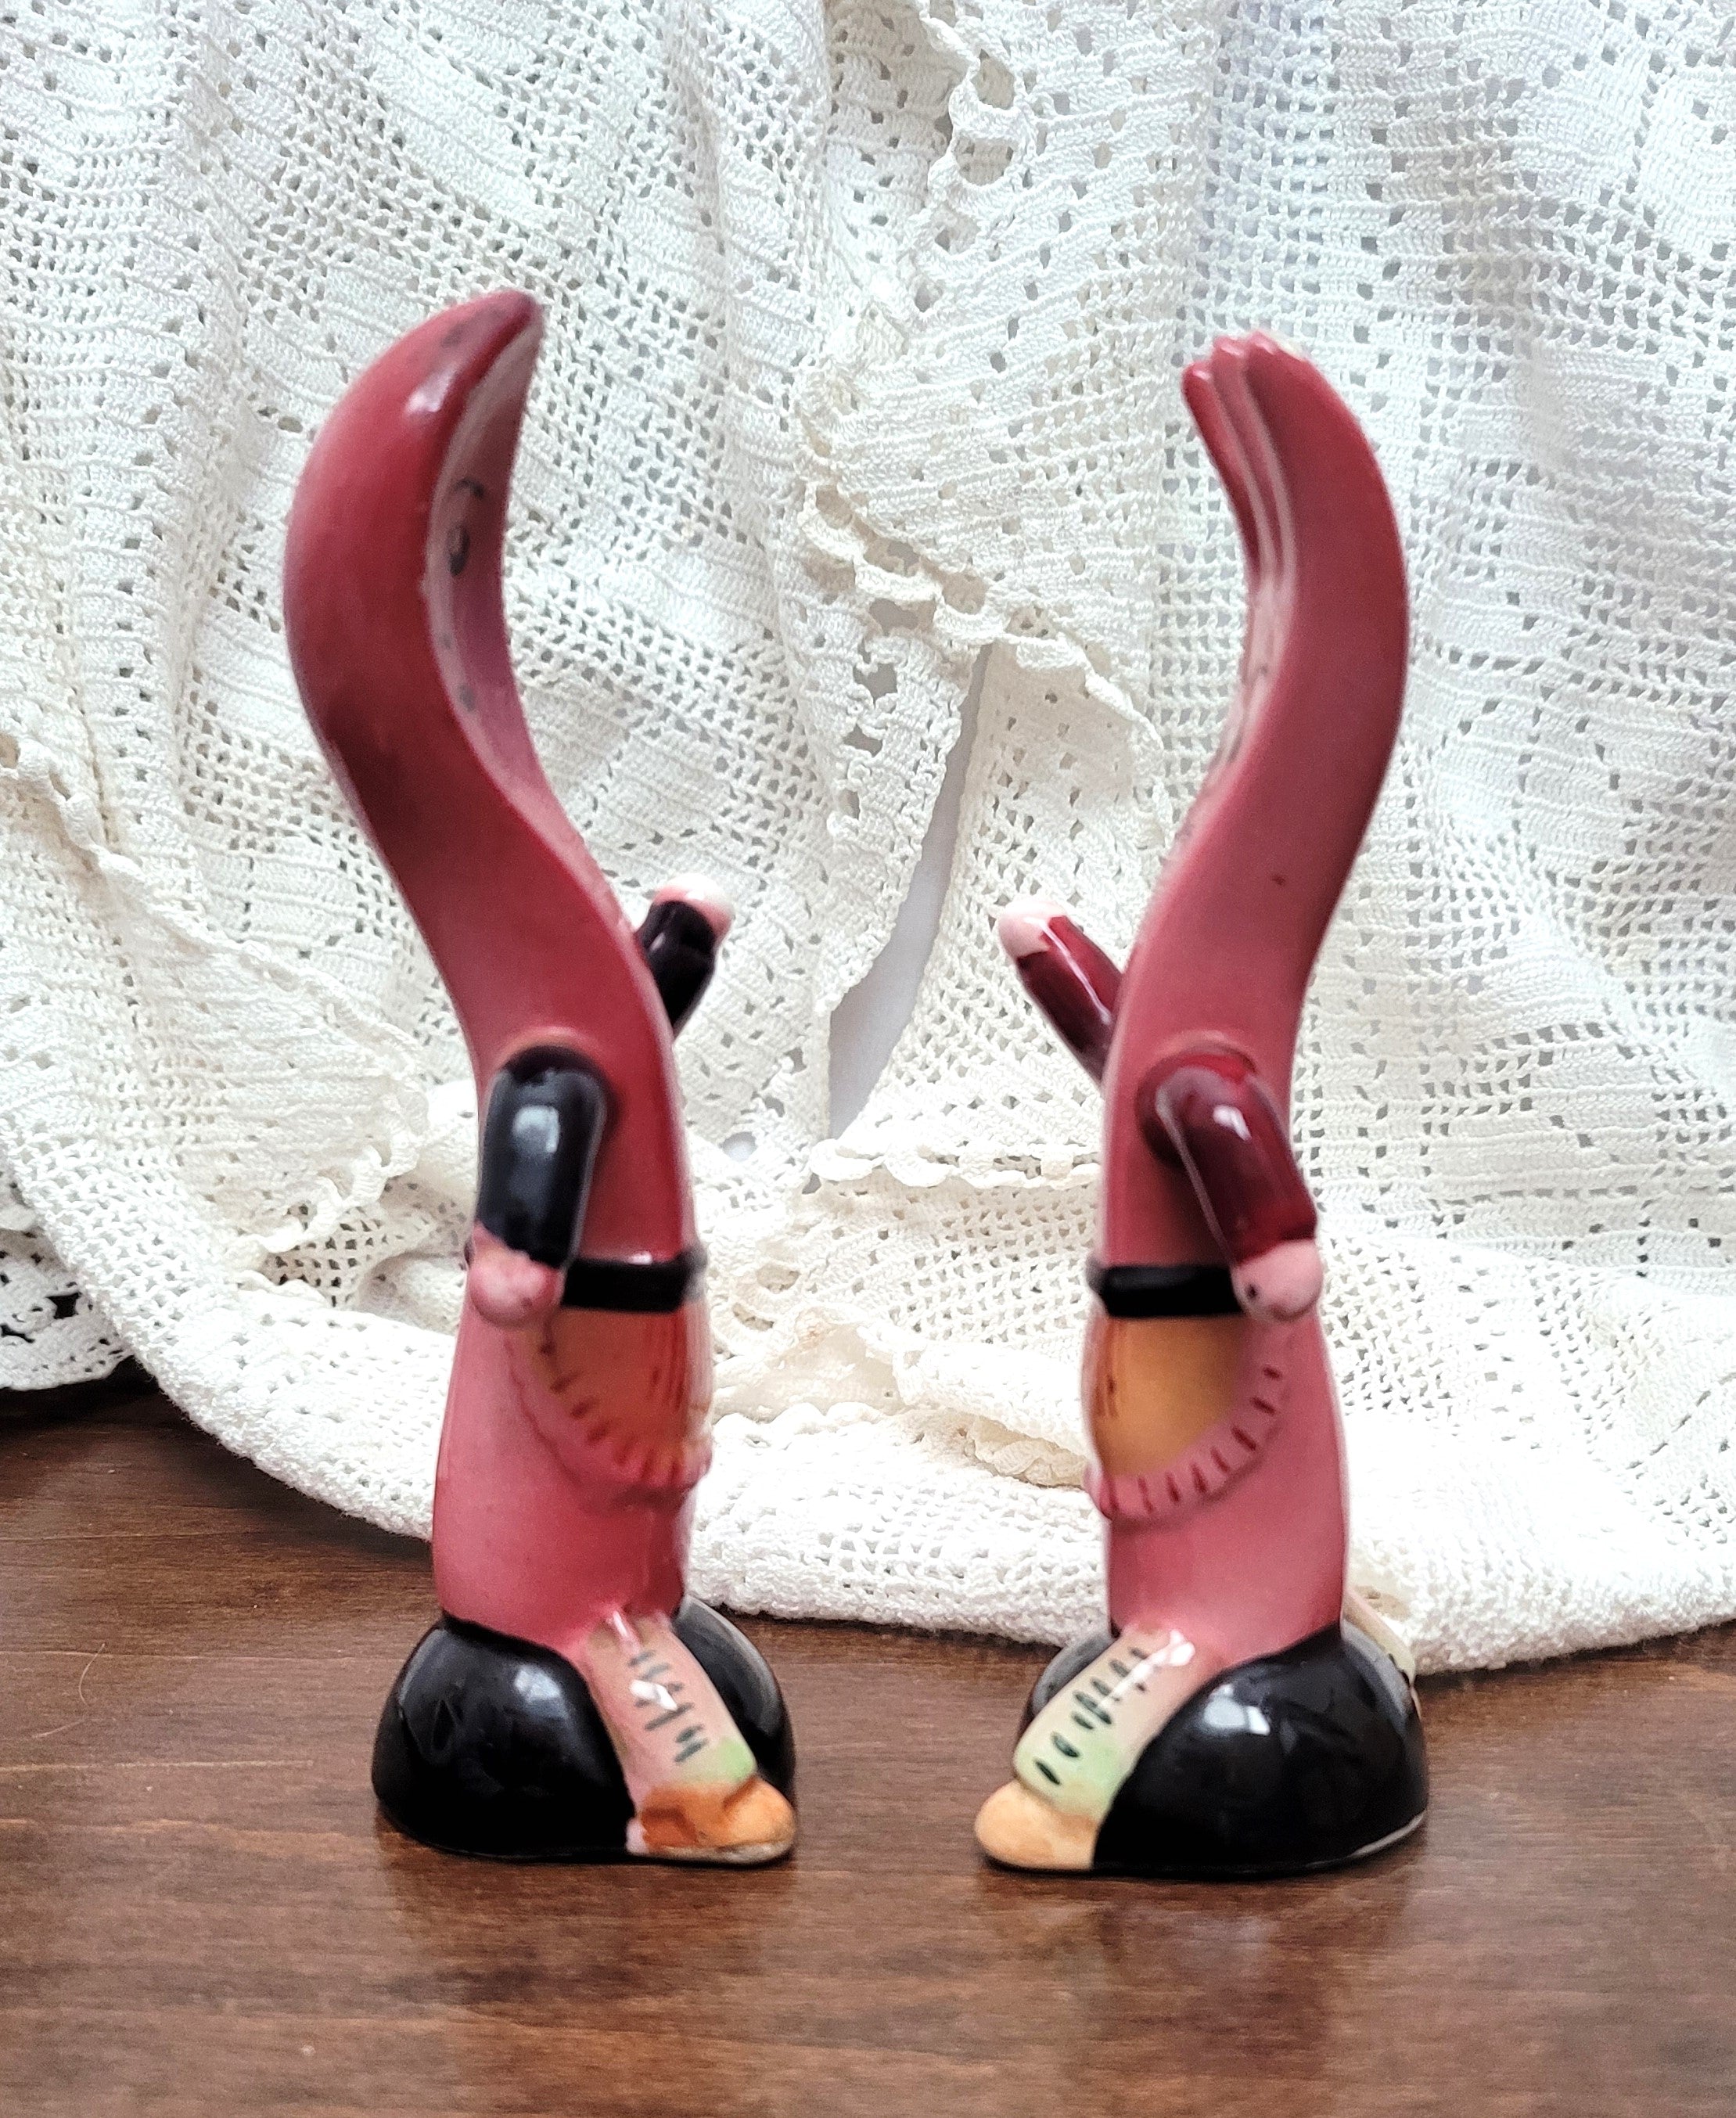 Fork and Spoon Salt & Pepper Shakers